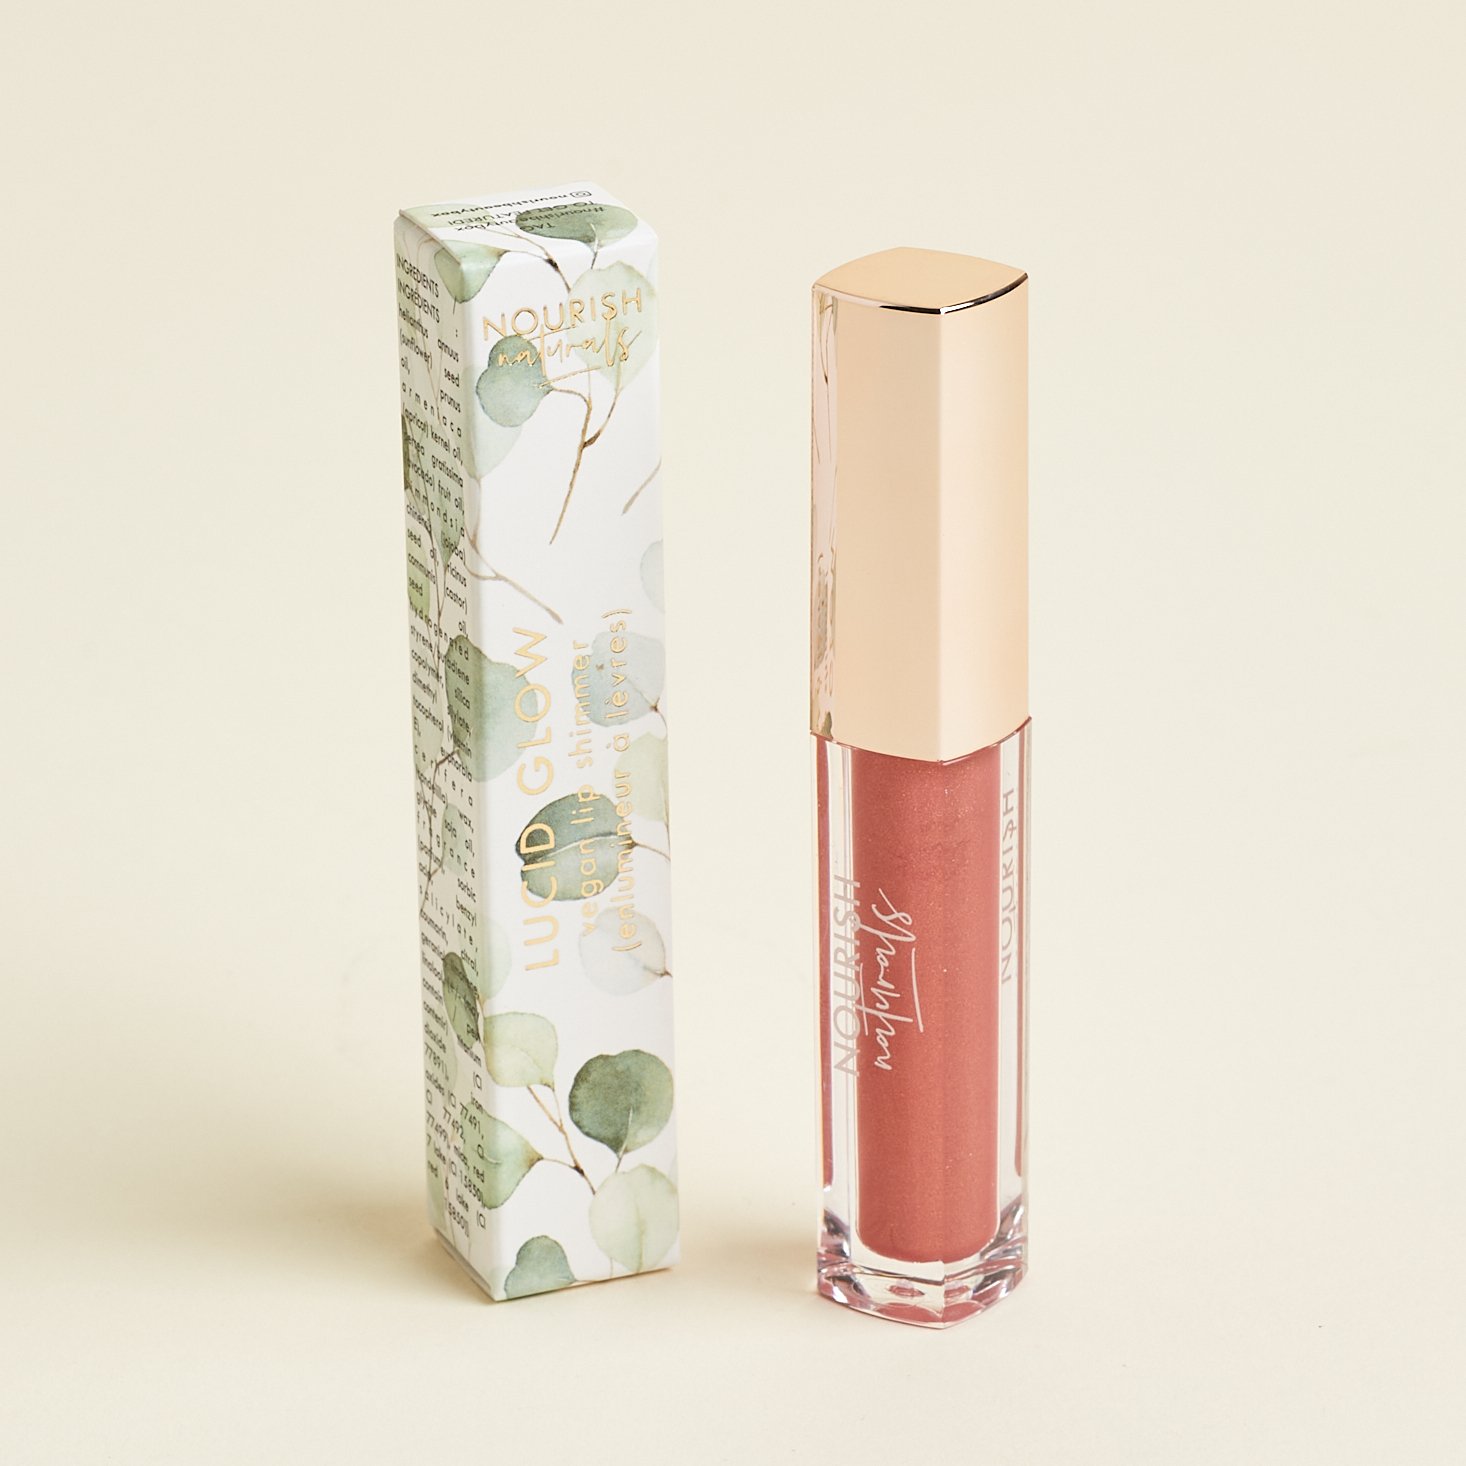 Nourish Naturals Lucid Glow Lip Shimmer in Rosette Front for Nourish Beauty Box April 2021